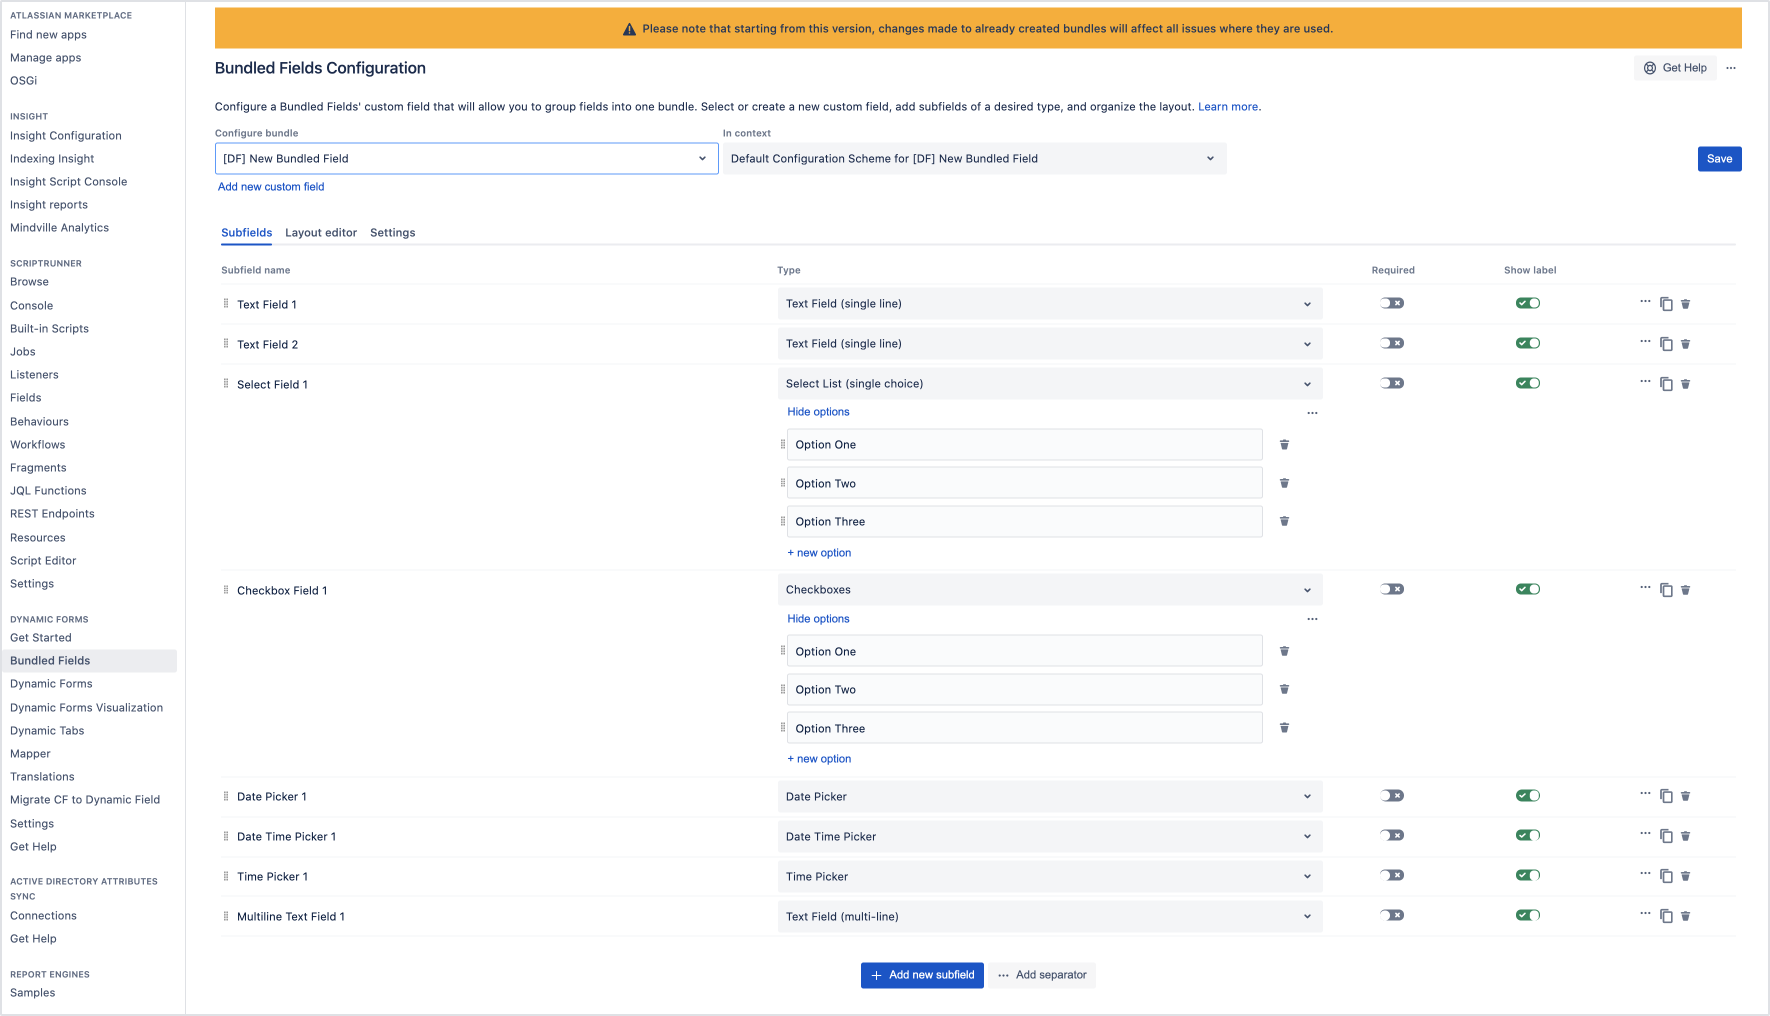 Dynamic Forms for Jira - Bundled Field Structure: Configuration